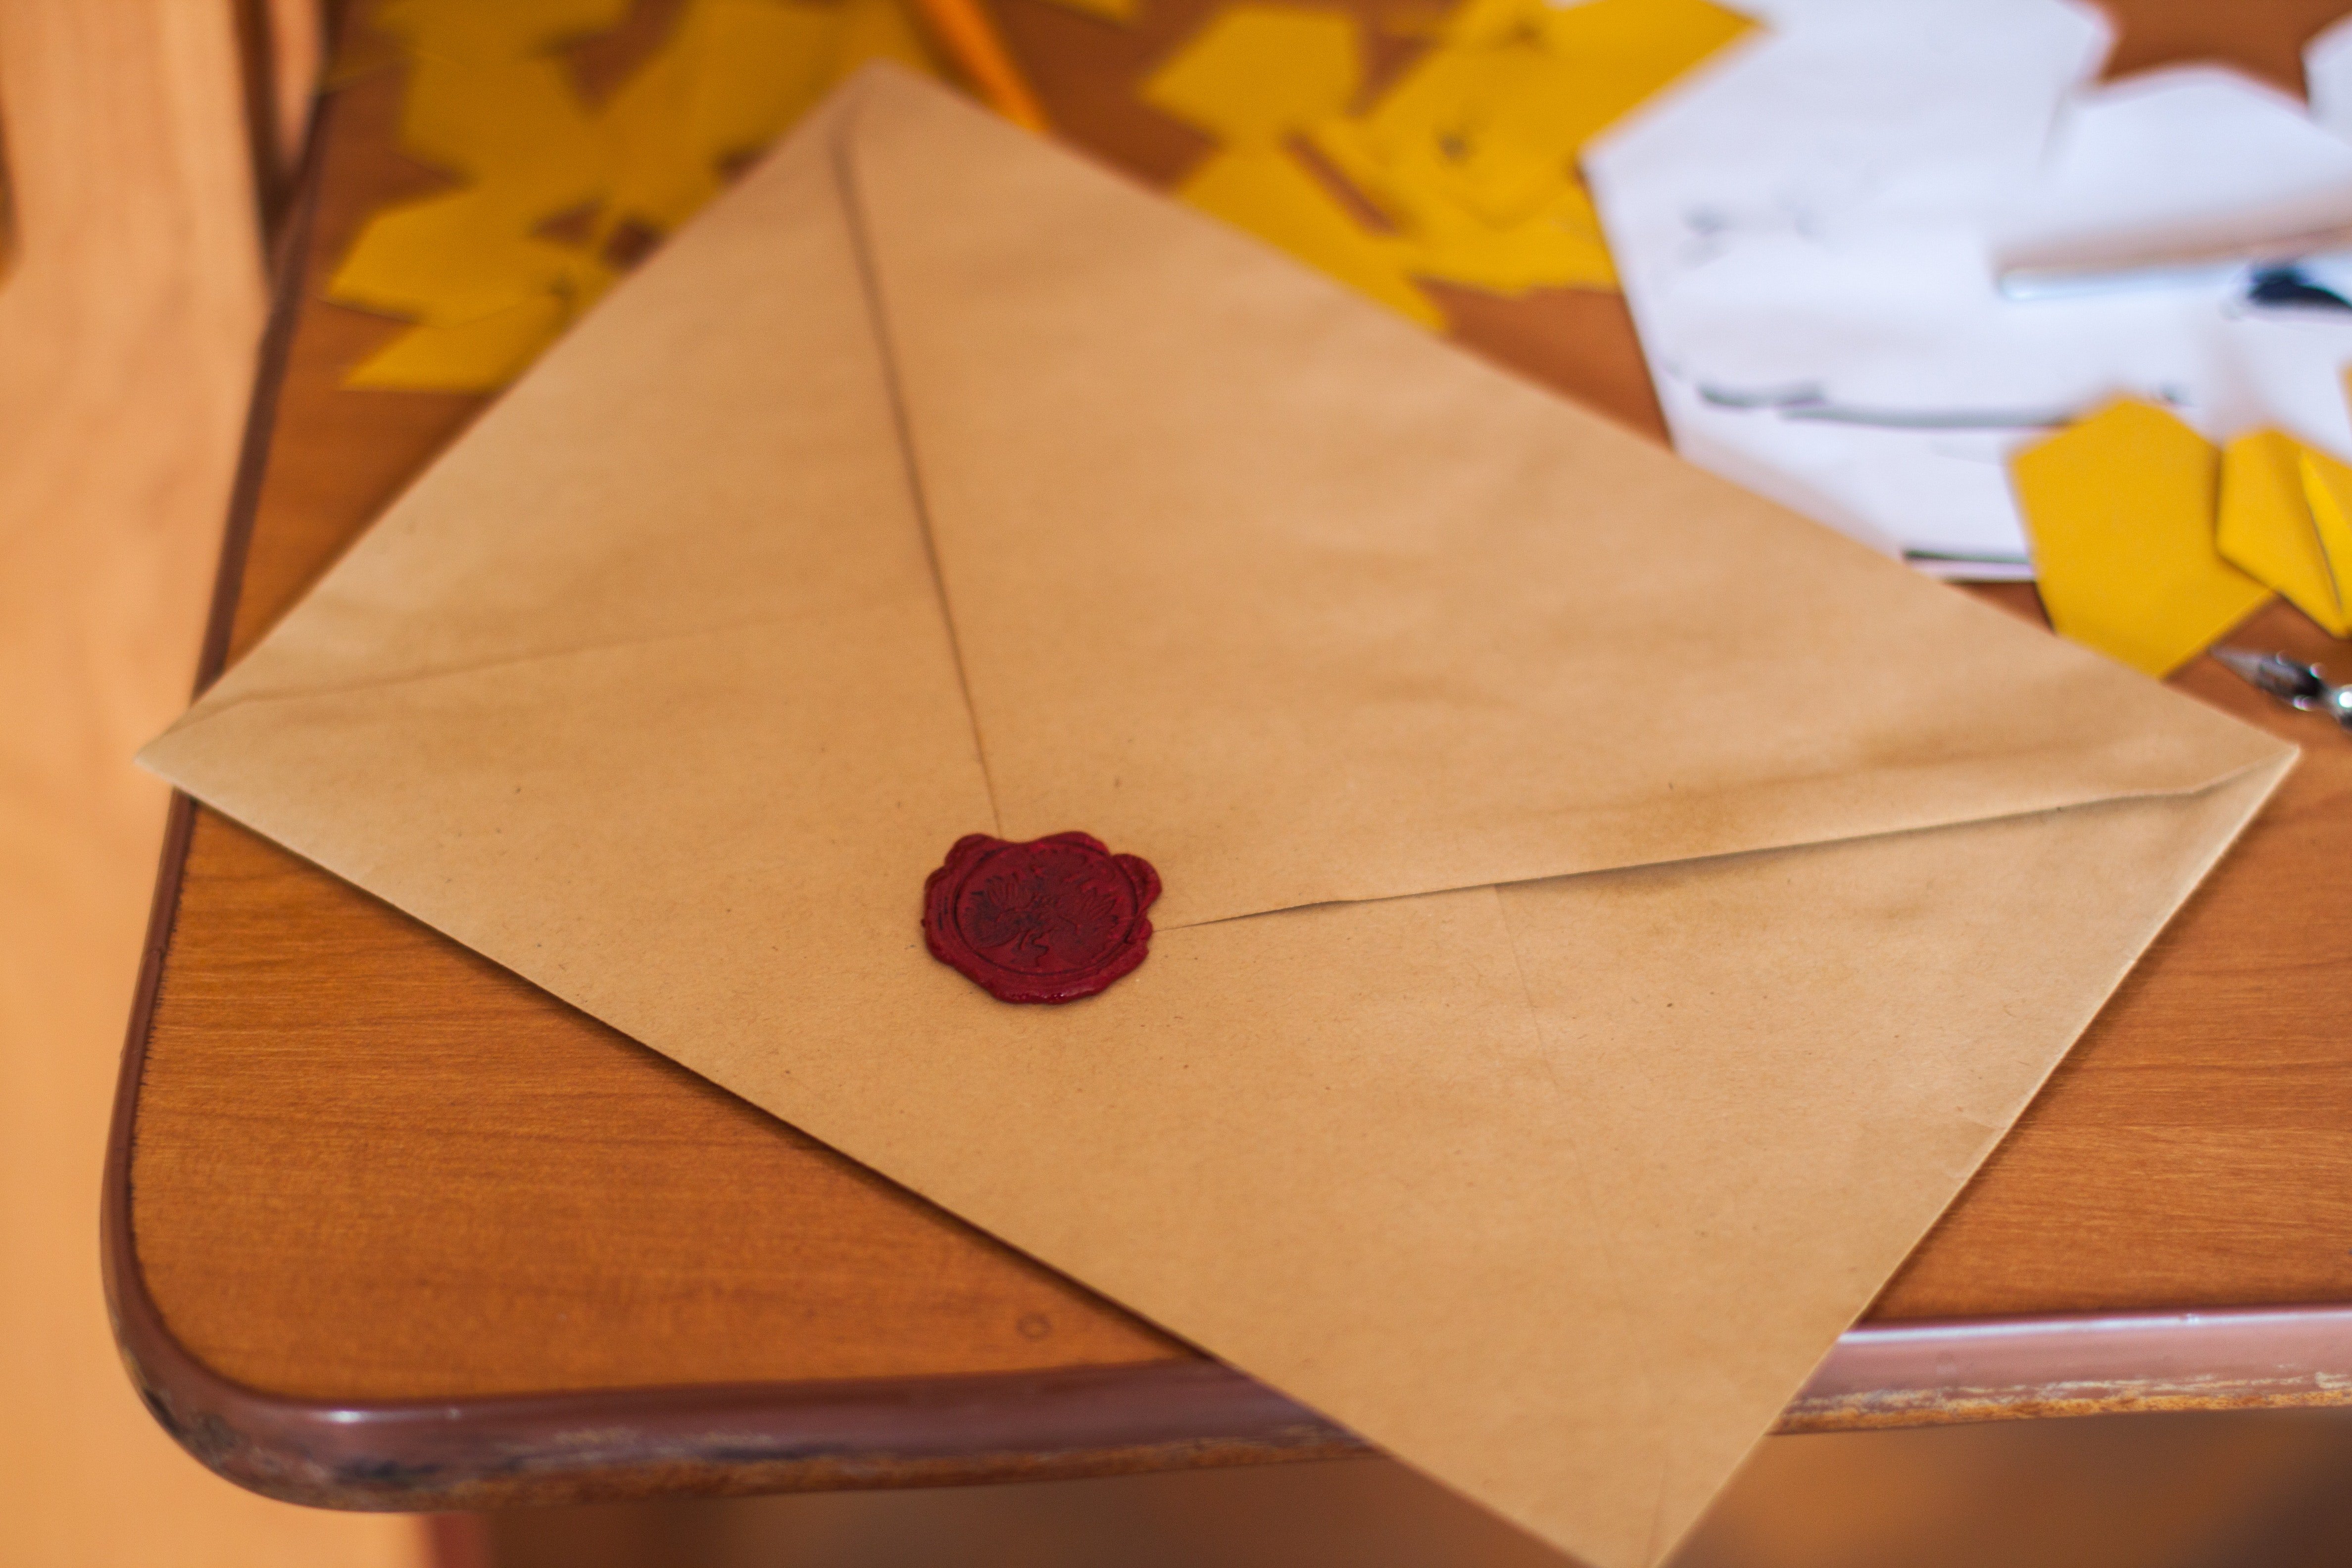 Peter opened the envelope when he was 16. | Source: Pexels